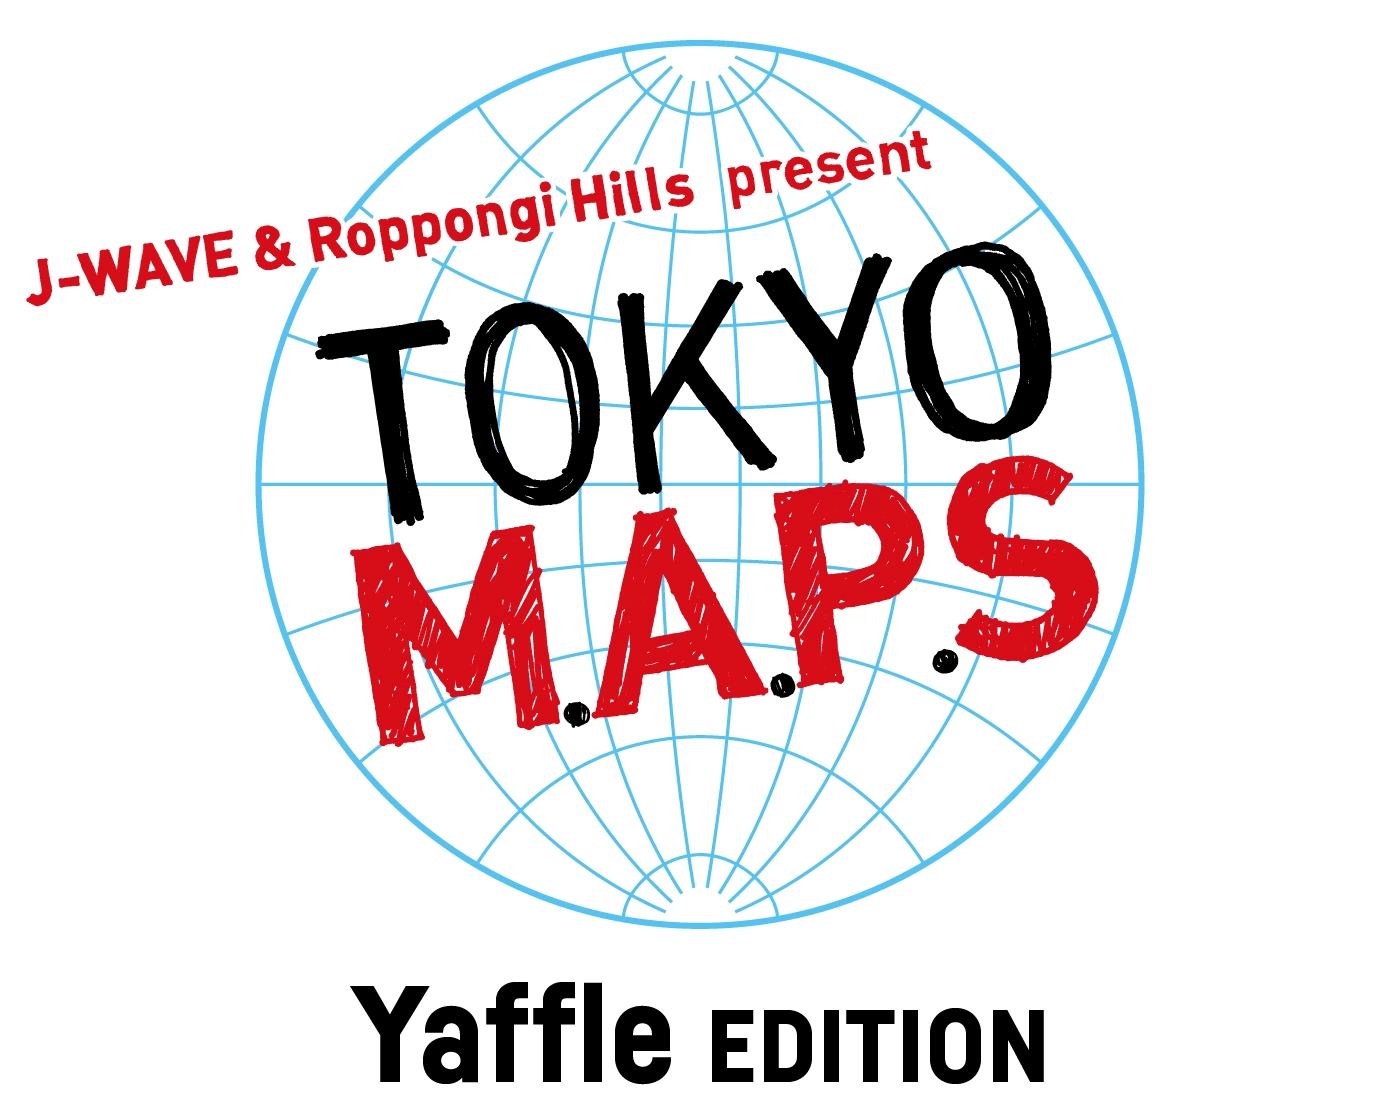 J-WAVE & Roppongi Hills present TOKYO M.A.P.S Yaffle EDITION